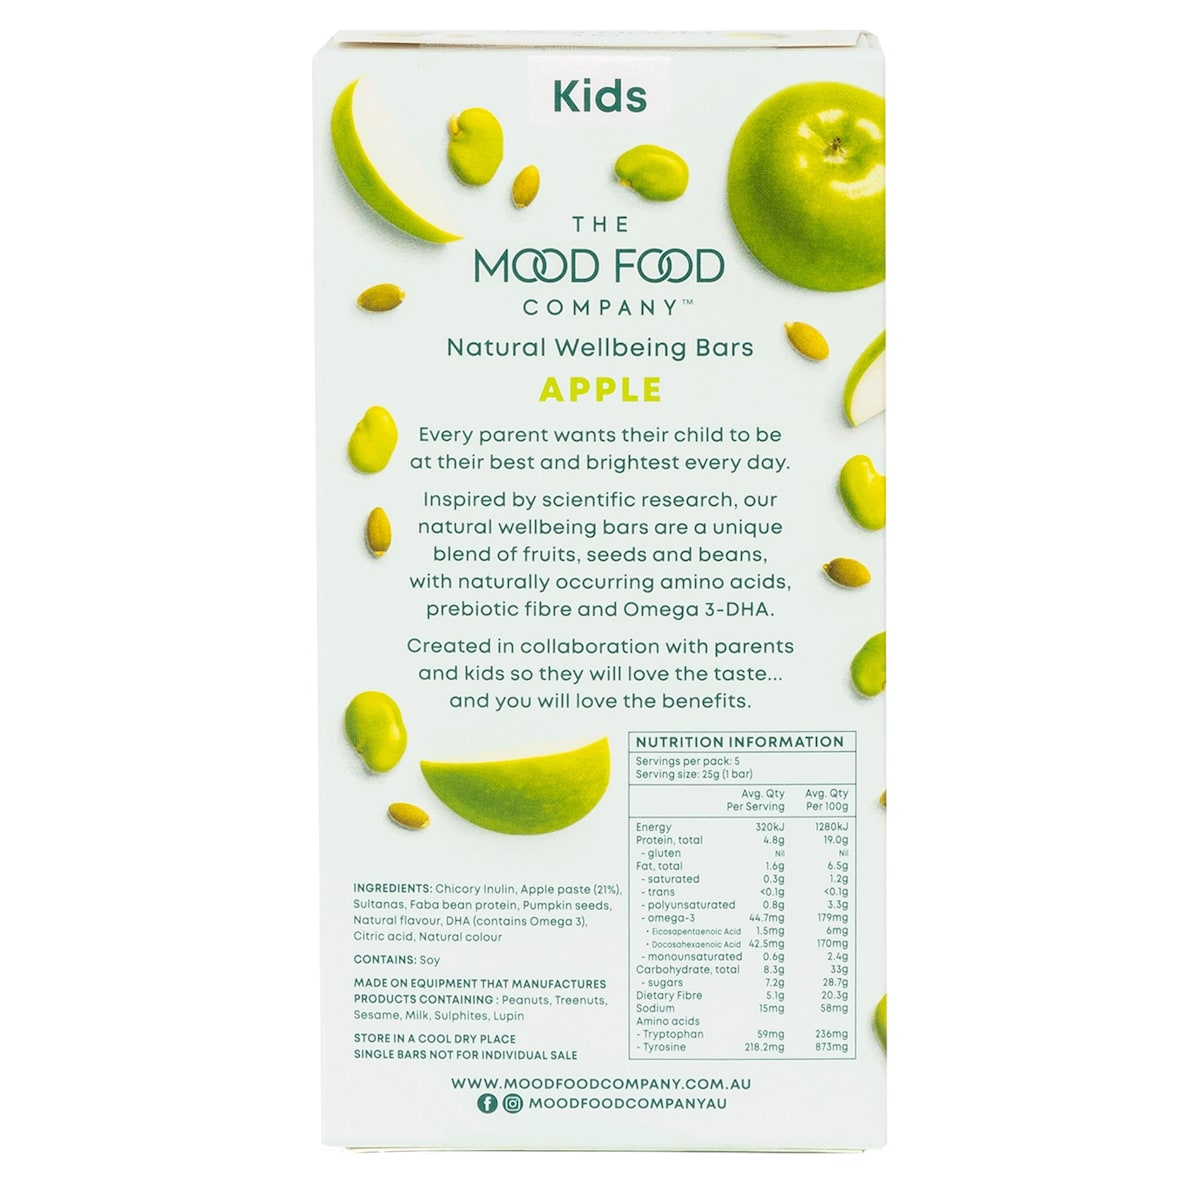 The Mood Food Company Natural Wellbeing Bars Apple 5 x 25g